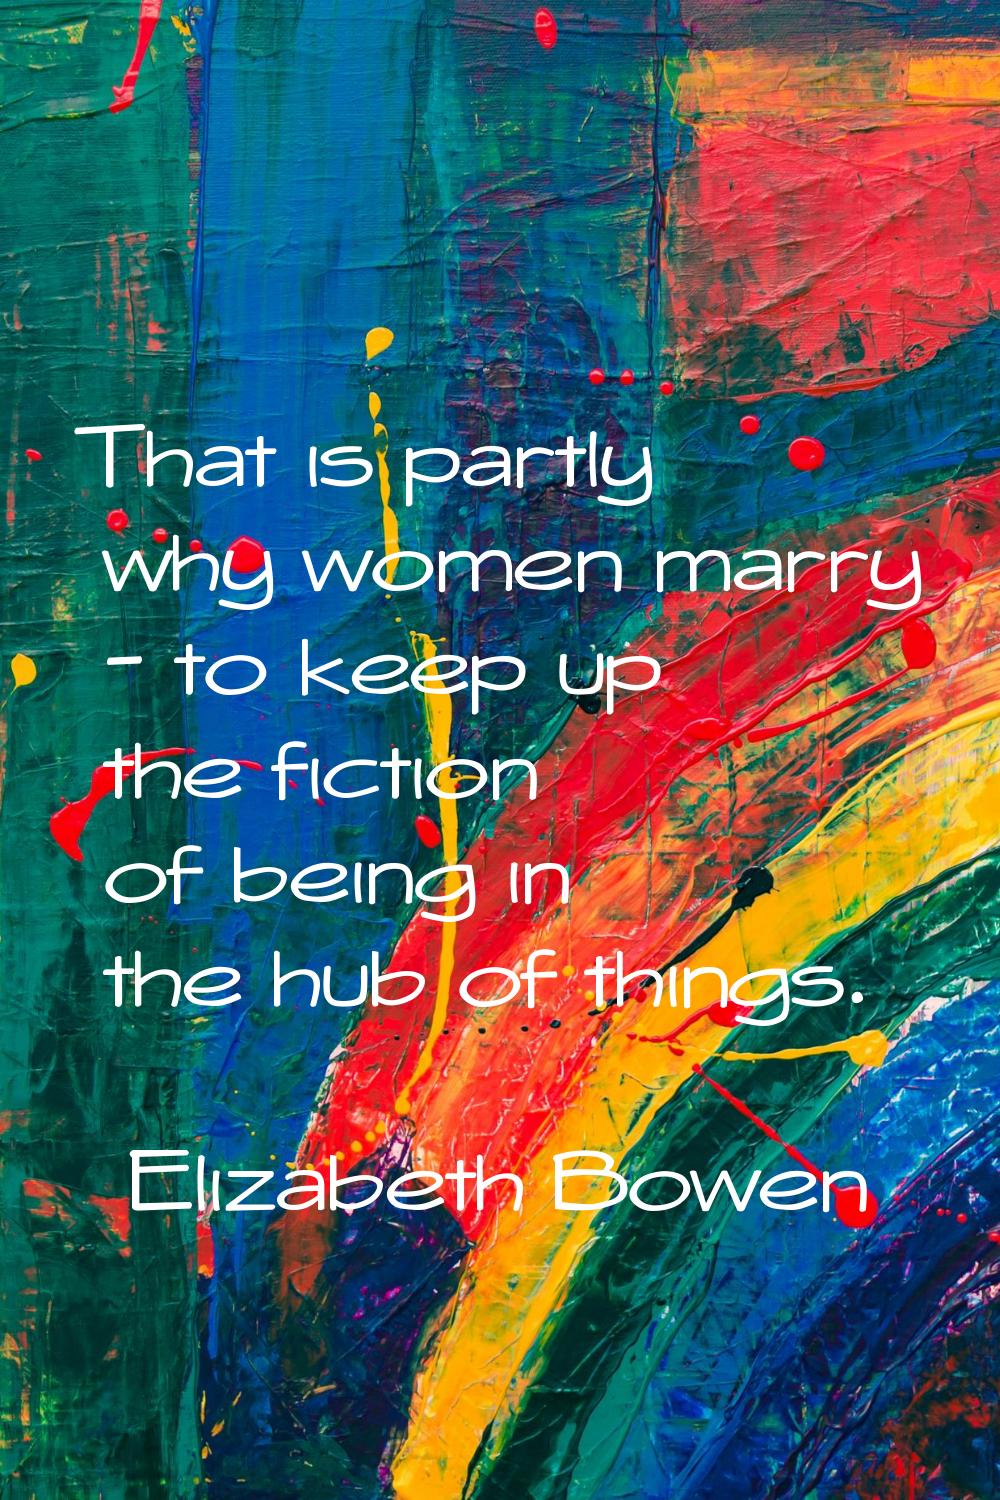 That is partly why women marry - to keep up the fiction of being in the hub of things.